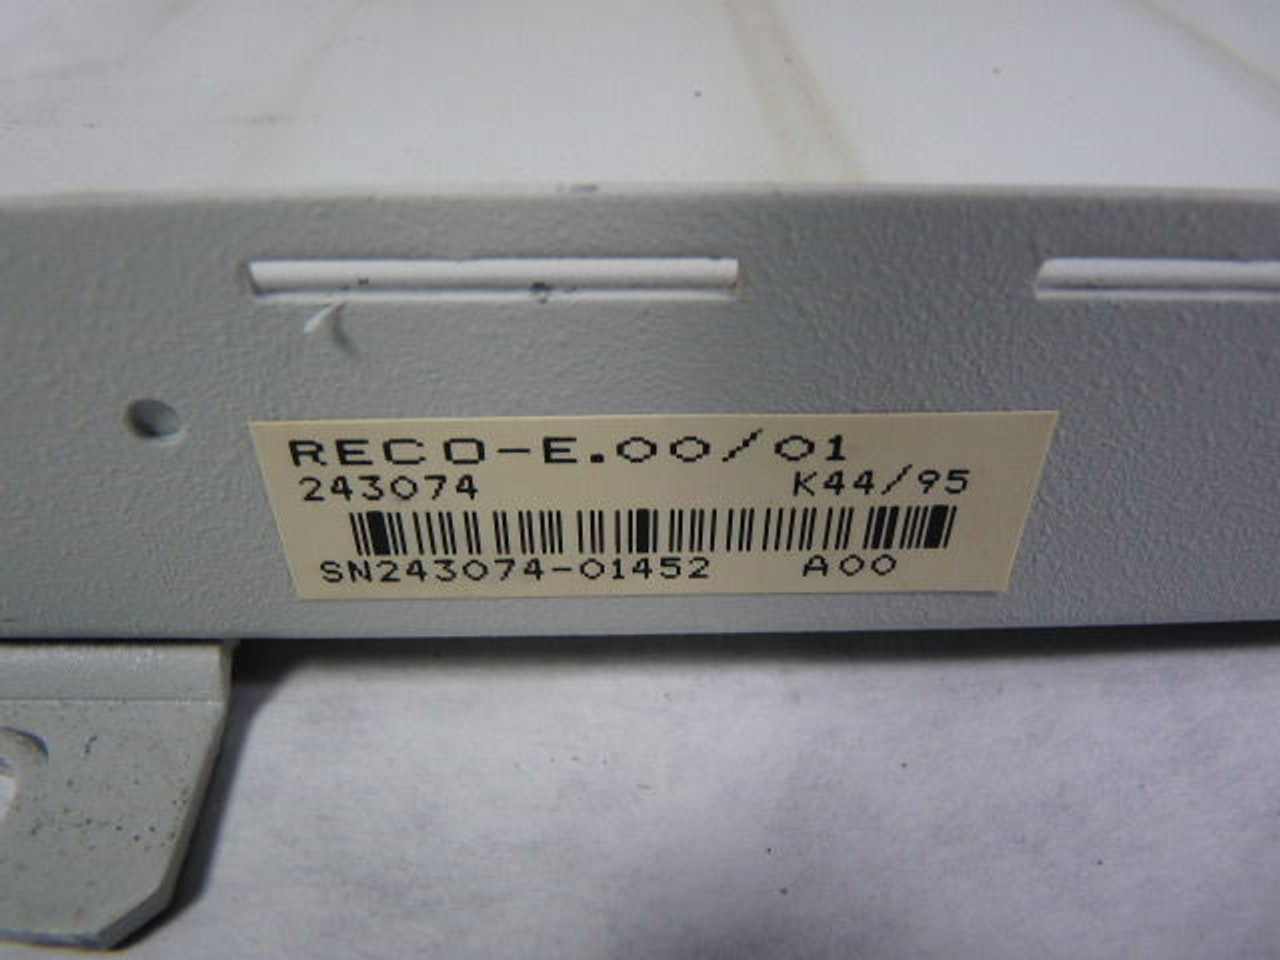 Indramat RECO-E.00/01 8-Slot Expansion Rack USED